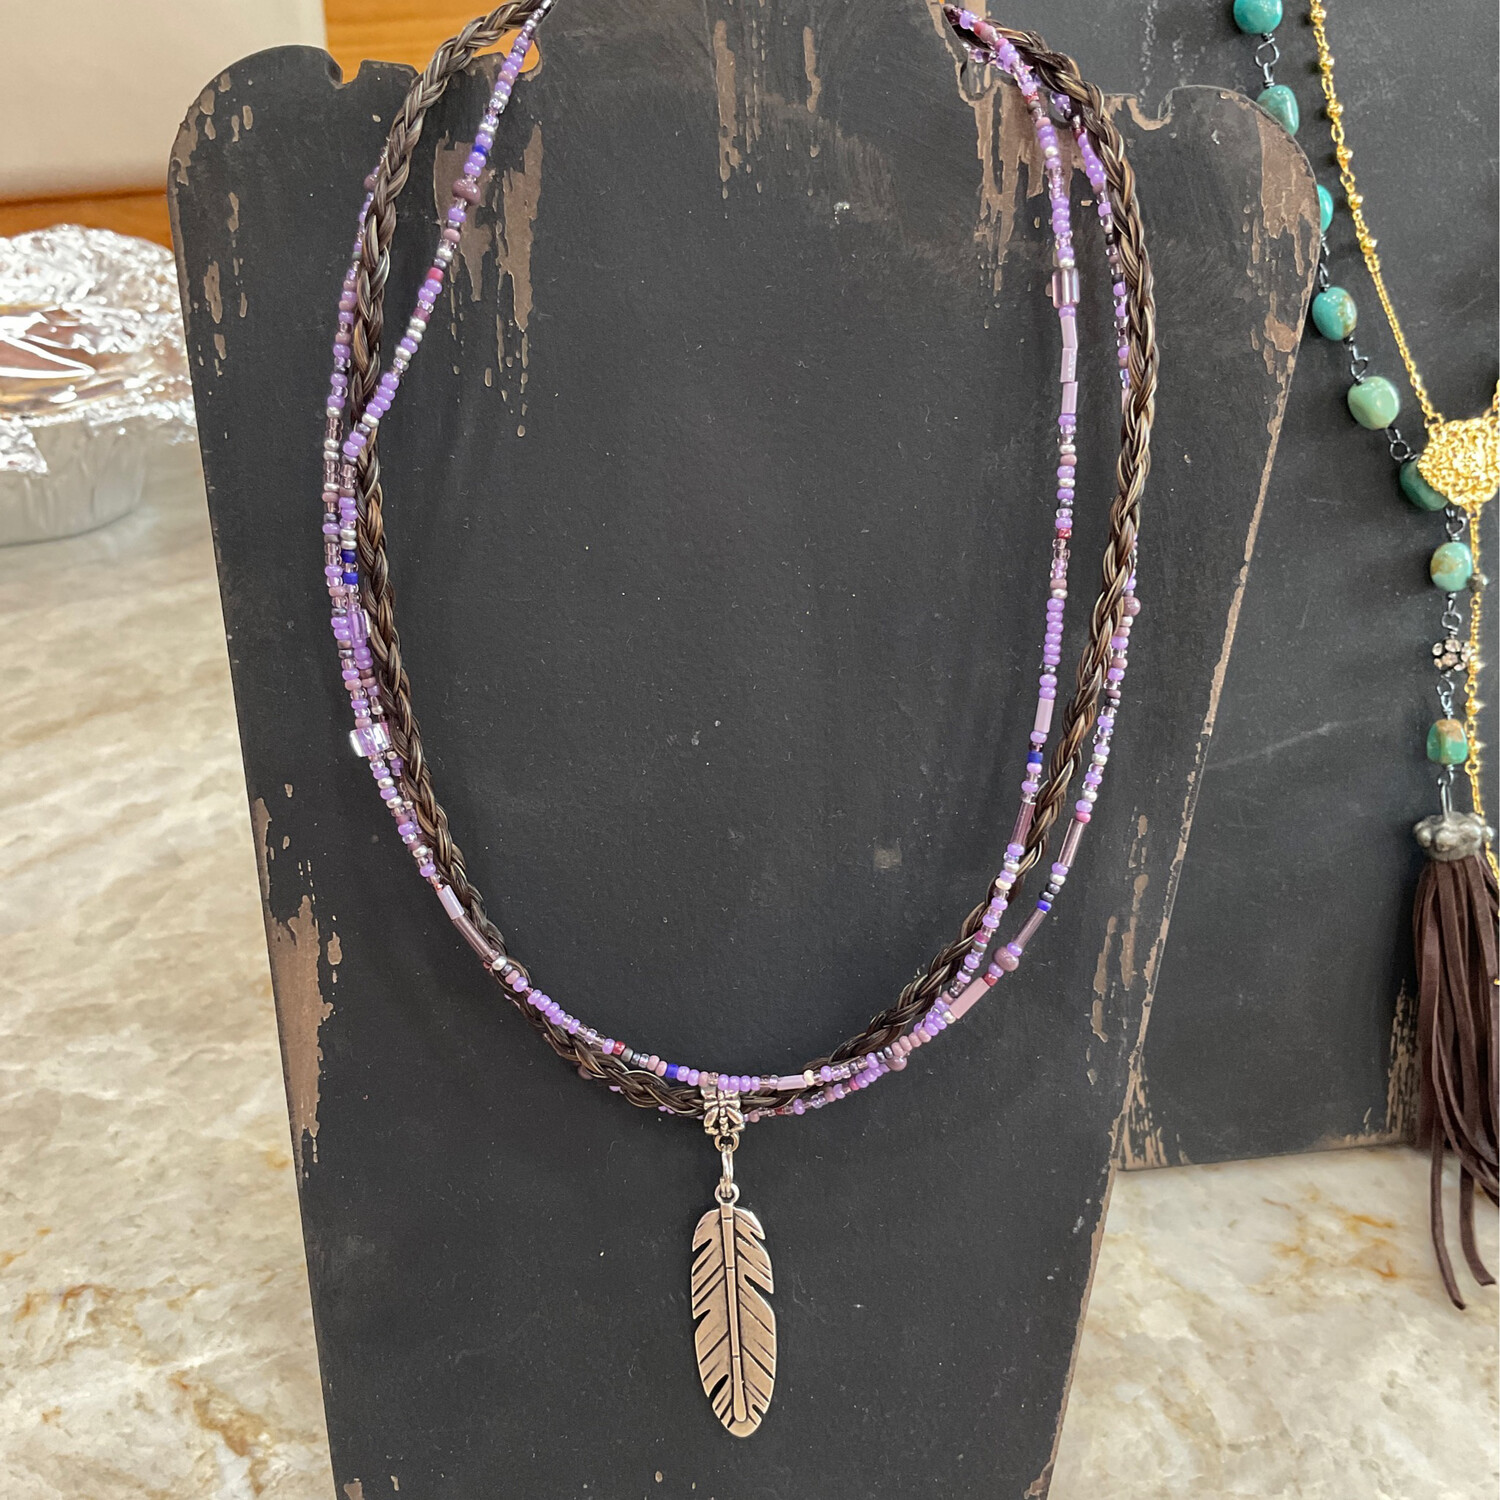 Cowboy Collectibles N6-L FS Necklace Lilac Silver Feather 